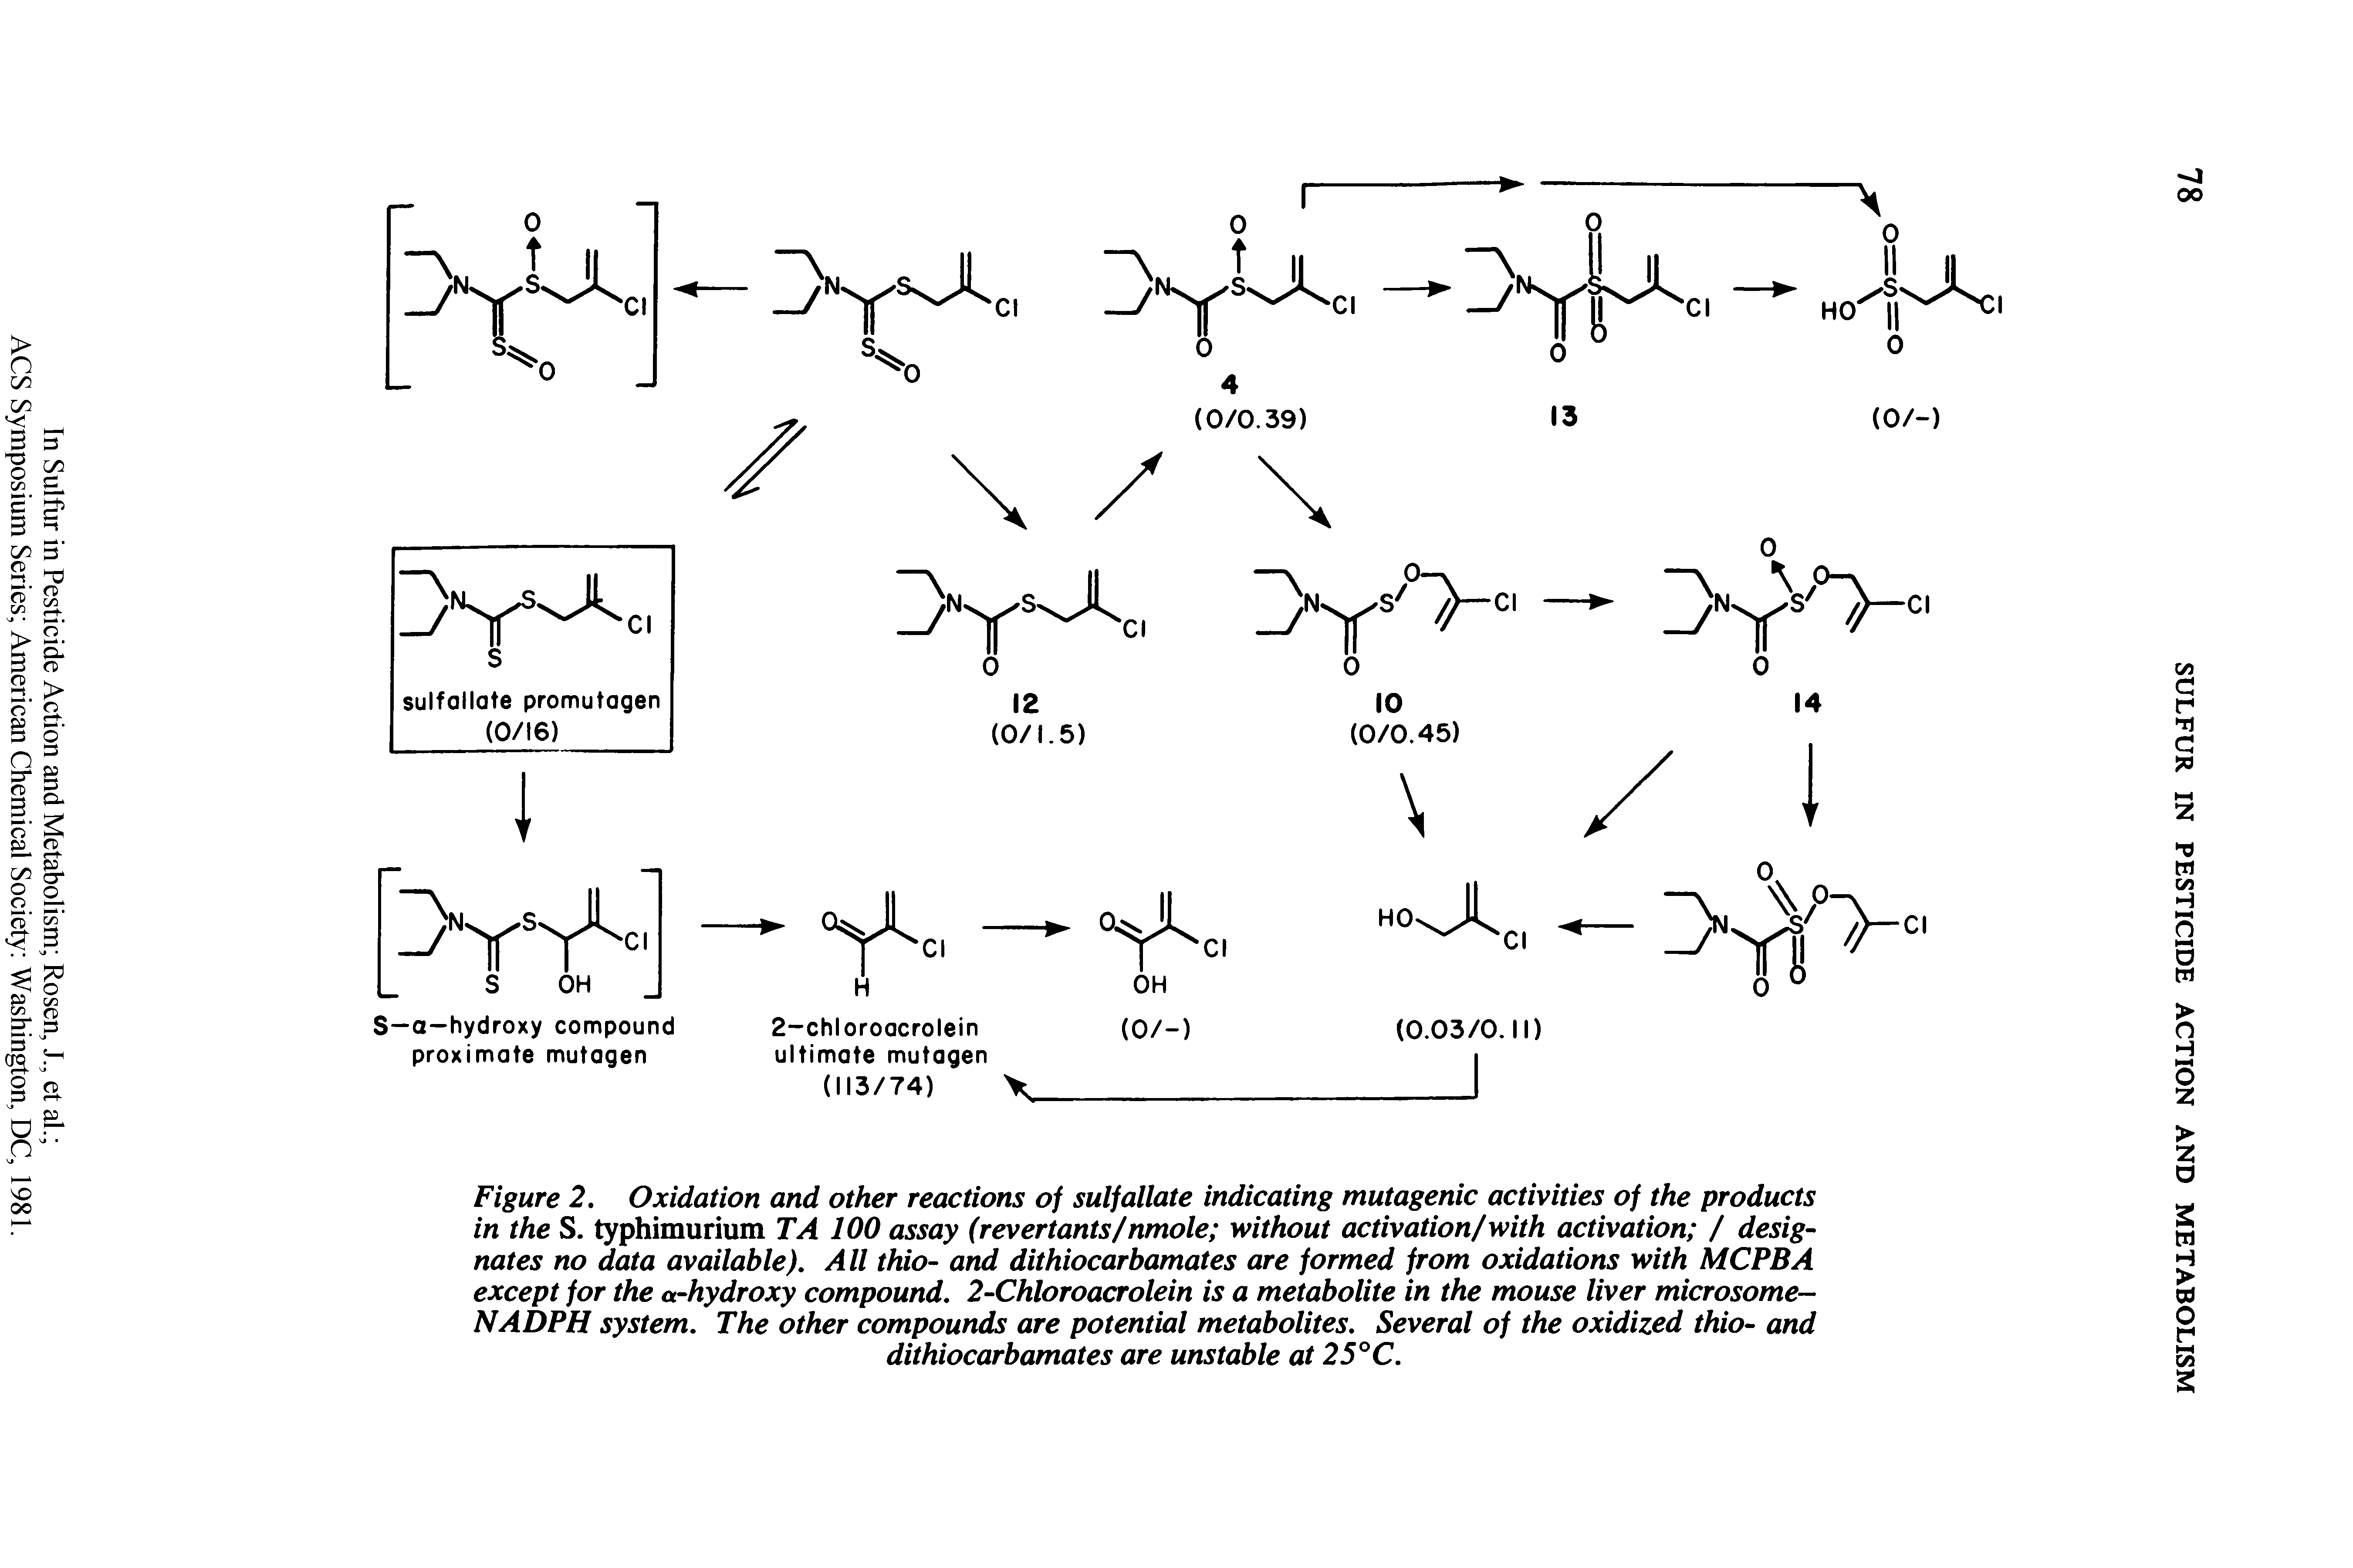 Figure 2, Oxidation and other reactions of suljallate indicating mutagenic activities of the products in the S. typhimurium TA 100 assay (revertants/nmole without activation/with activation / designates no data available). All thio- and dithiocarbamates are formed from oxidations with MCPBA except for the a-hydroxy compound. 2-Chloroacrolein is a metabolite in the mouse liver microsome-NADPH system. The other compounds are potential metabolites. Several of the oxidized thio- and...